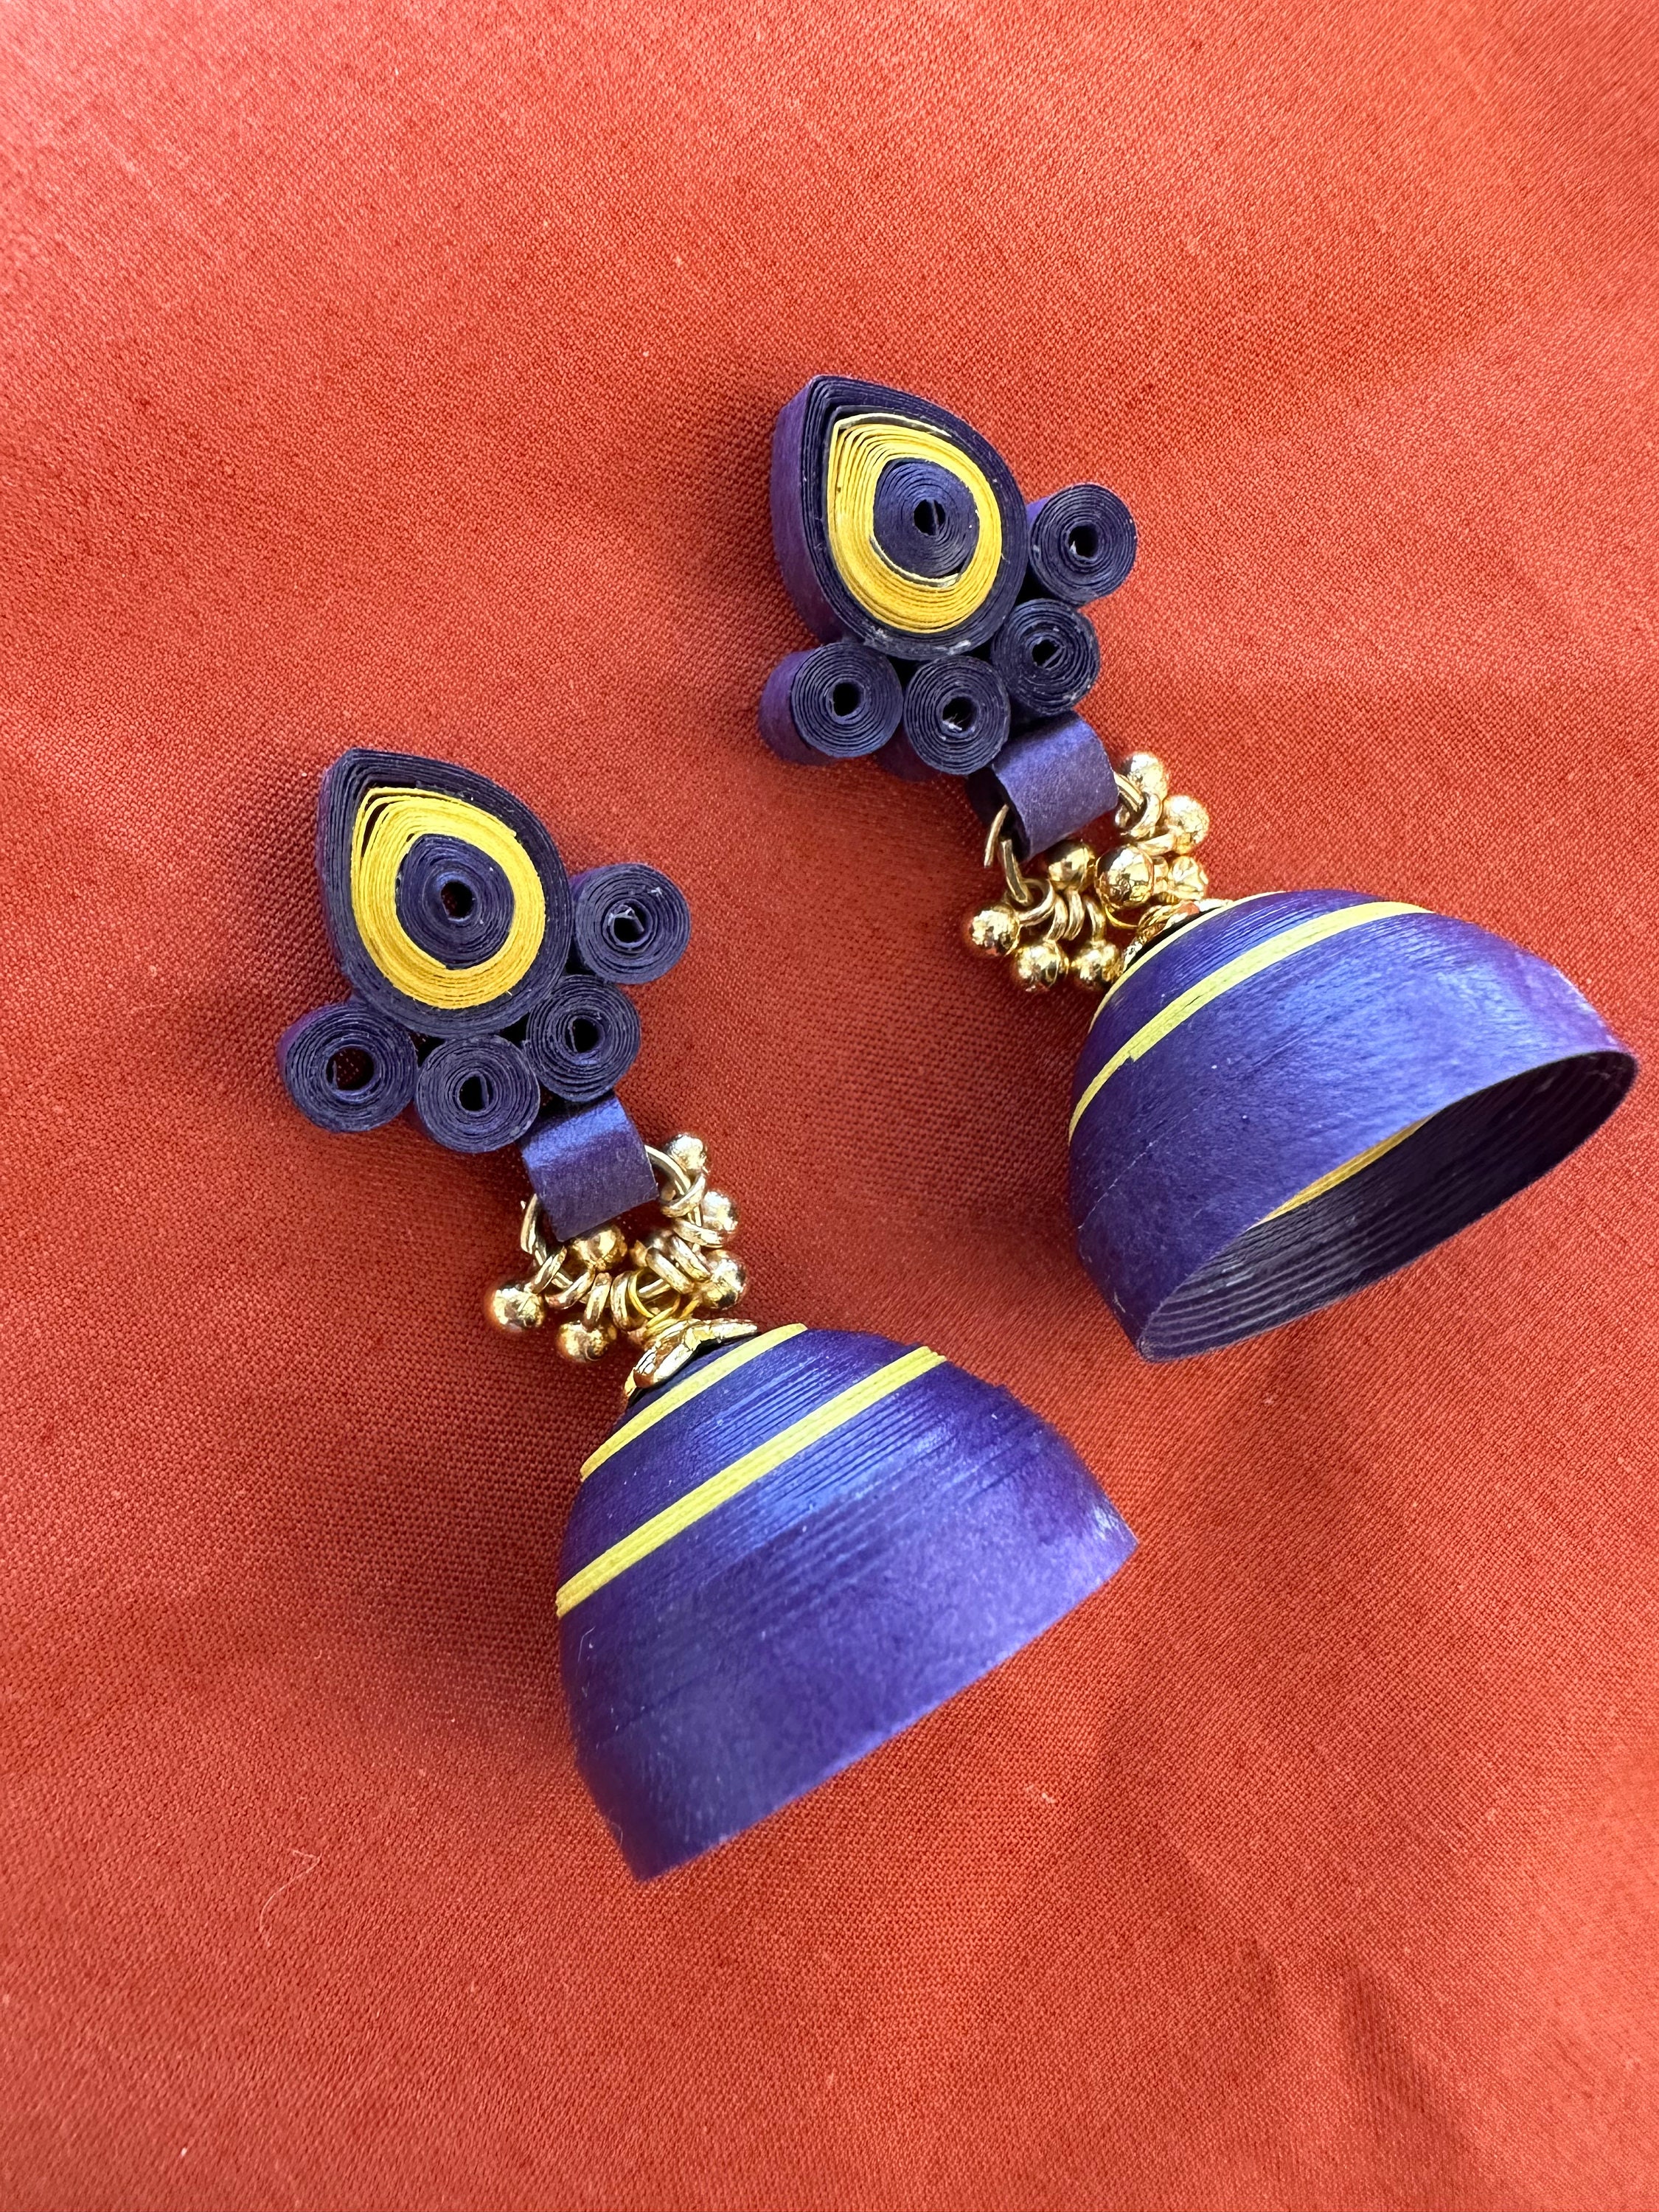 How to Make Paper Quilling Earrings Jhumkas Tutorial - YouTube